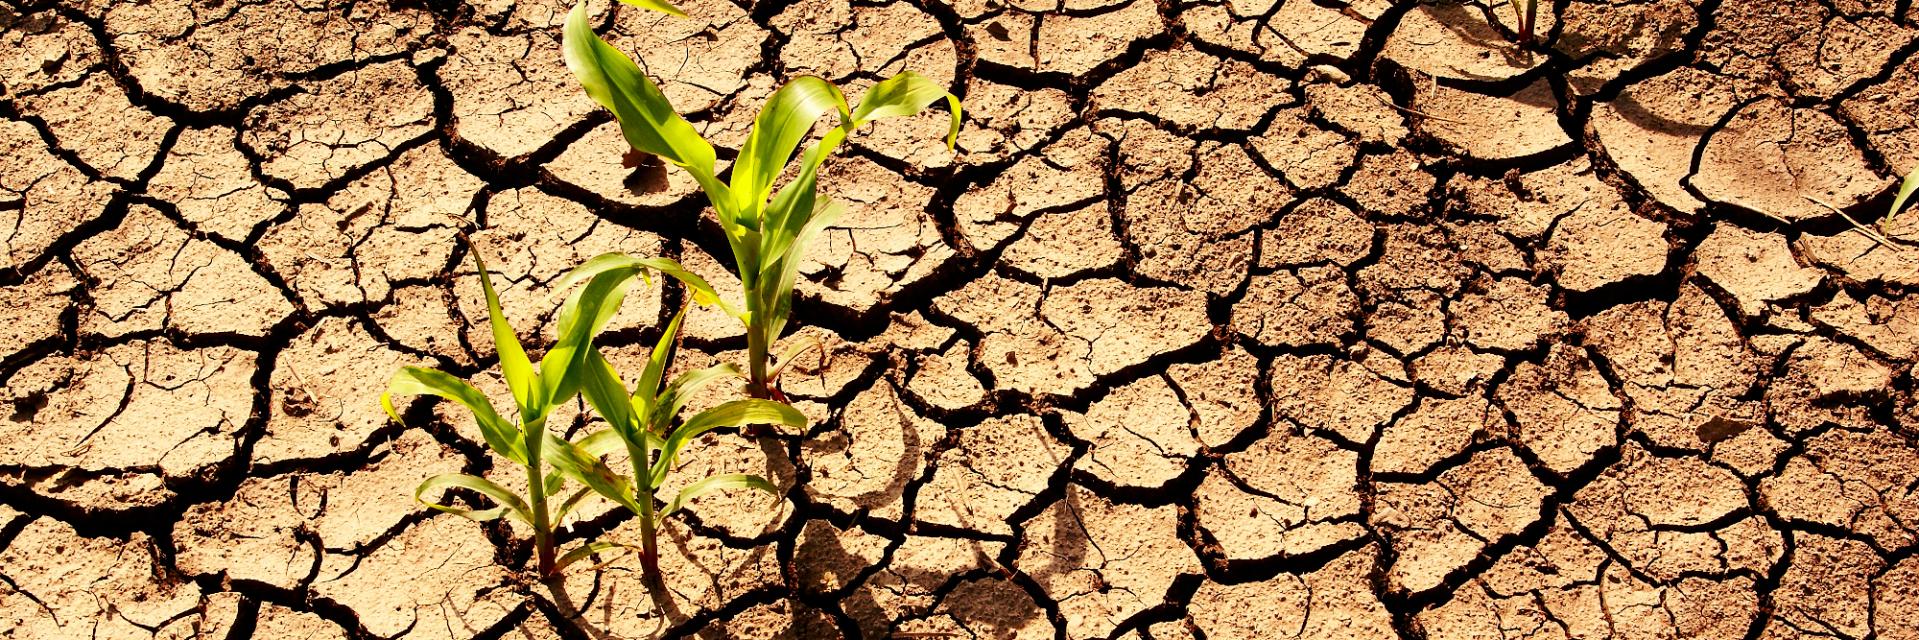 ECA plays leading role in Africa’s fight against climate change